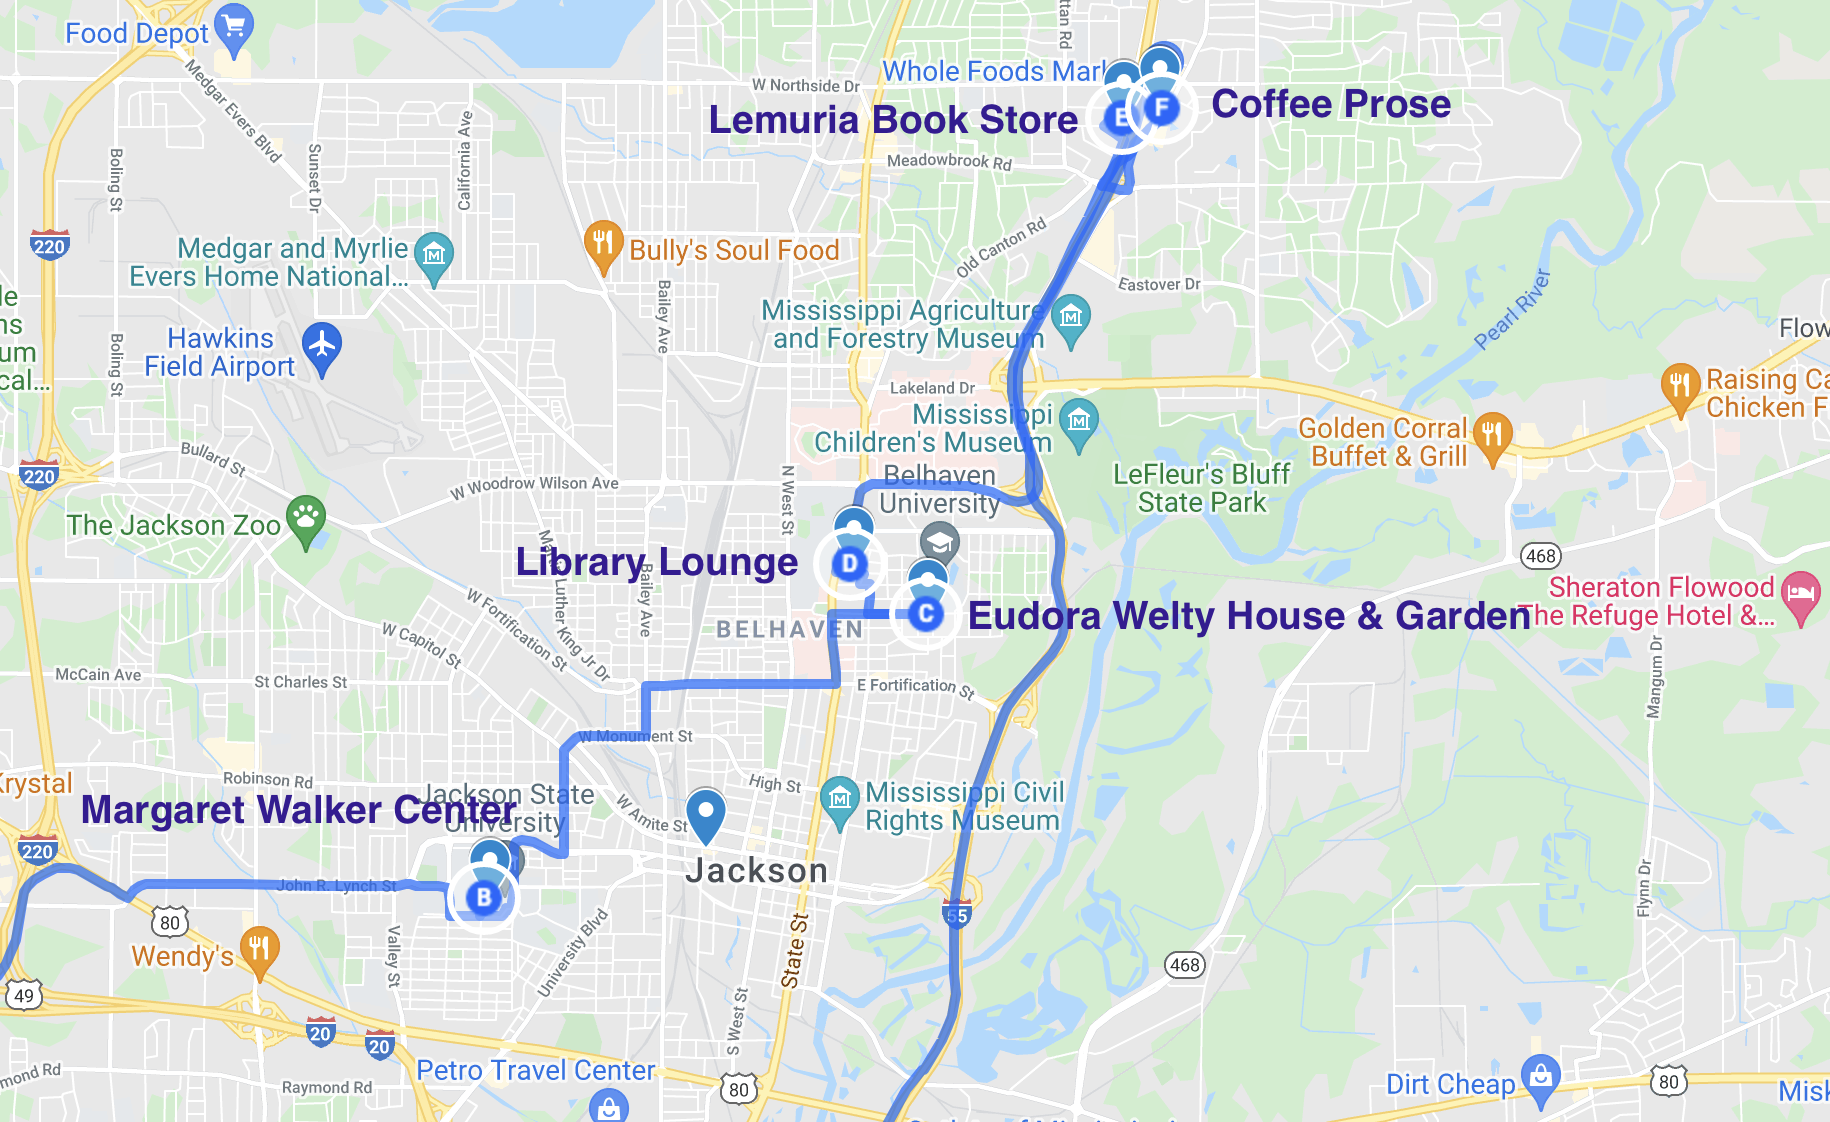 map of literary spots in jackson mississippi